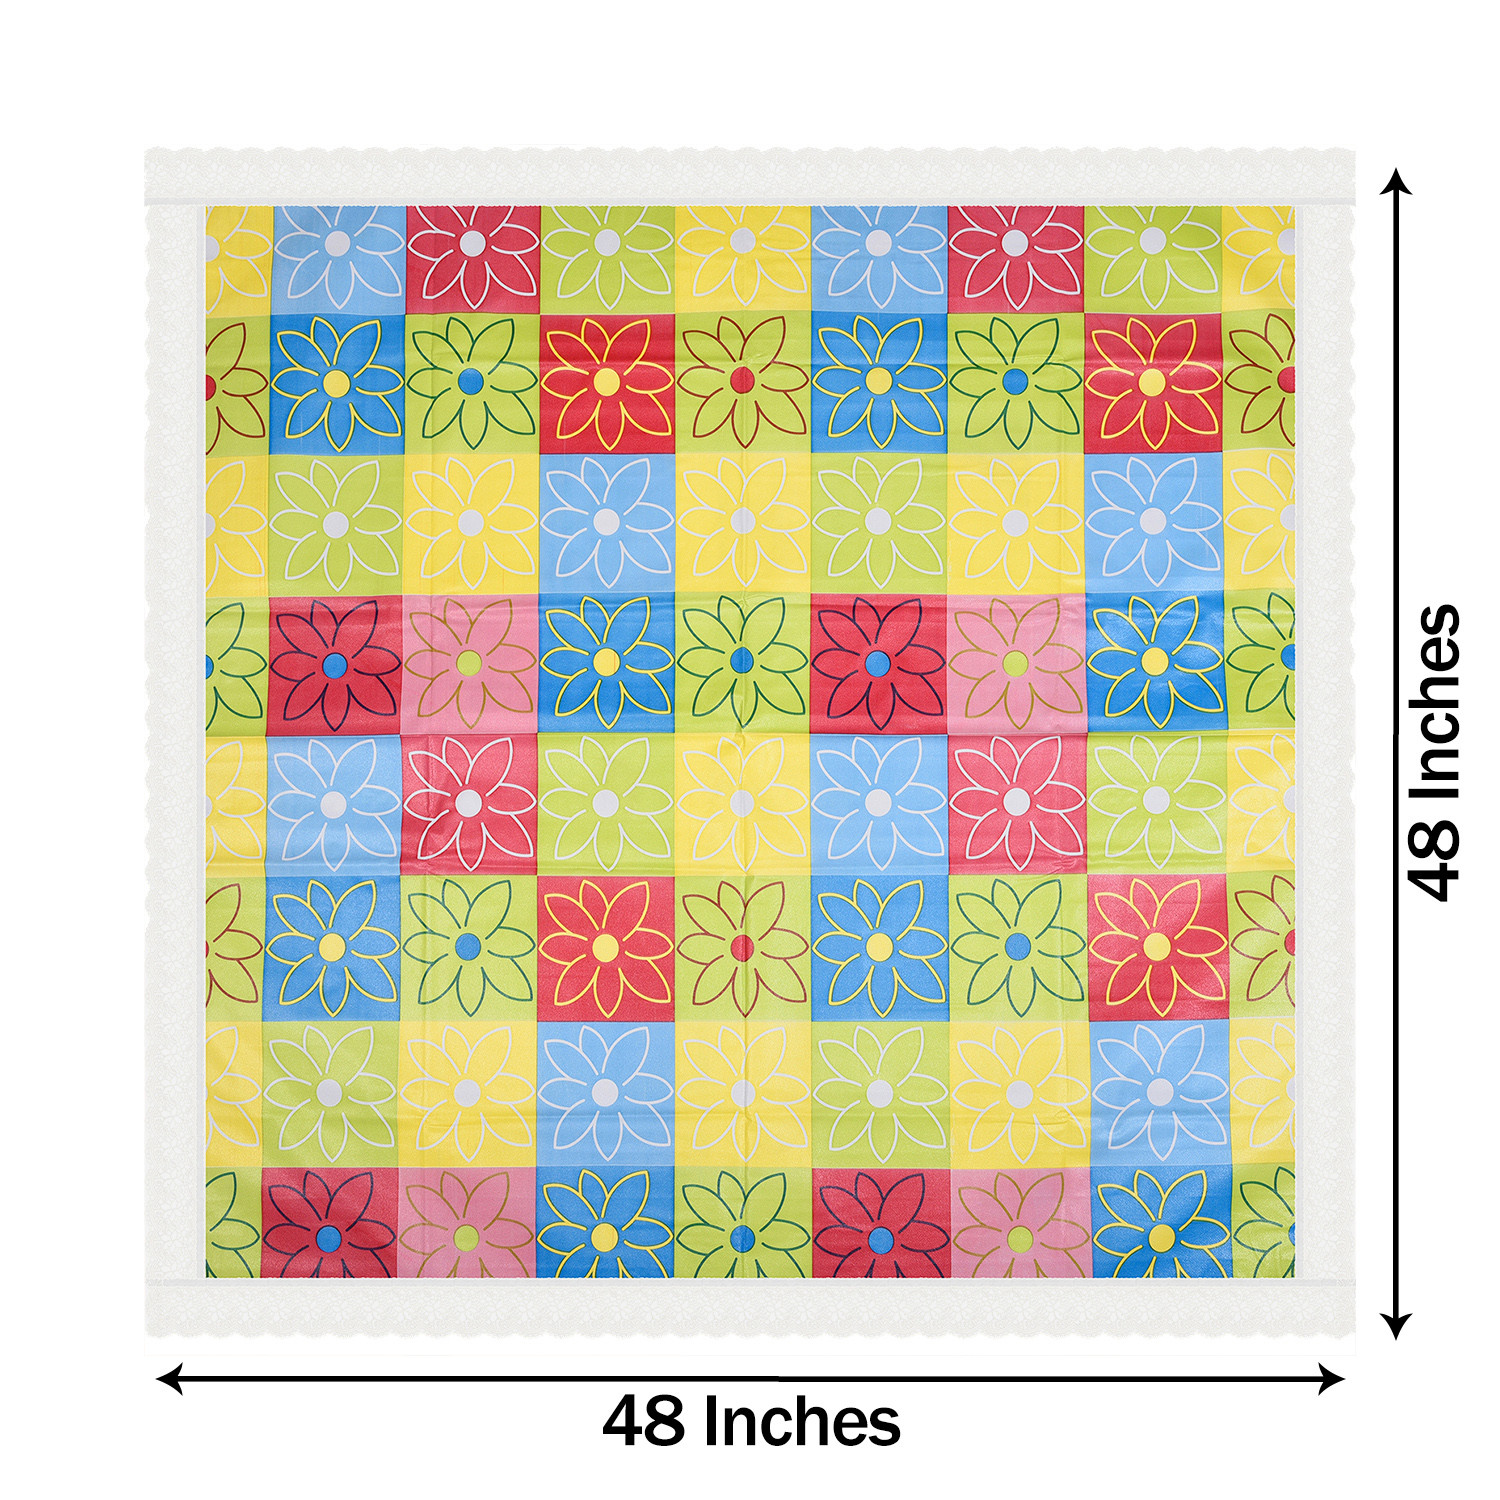 Kuber Industries Square Table Cover for 4 Seater|PVC Waterproof Check Pattern Tablecloth Indoor & Outdoor|48x48 Inch (Multicolor)